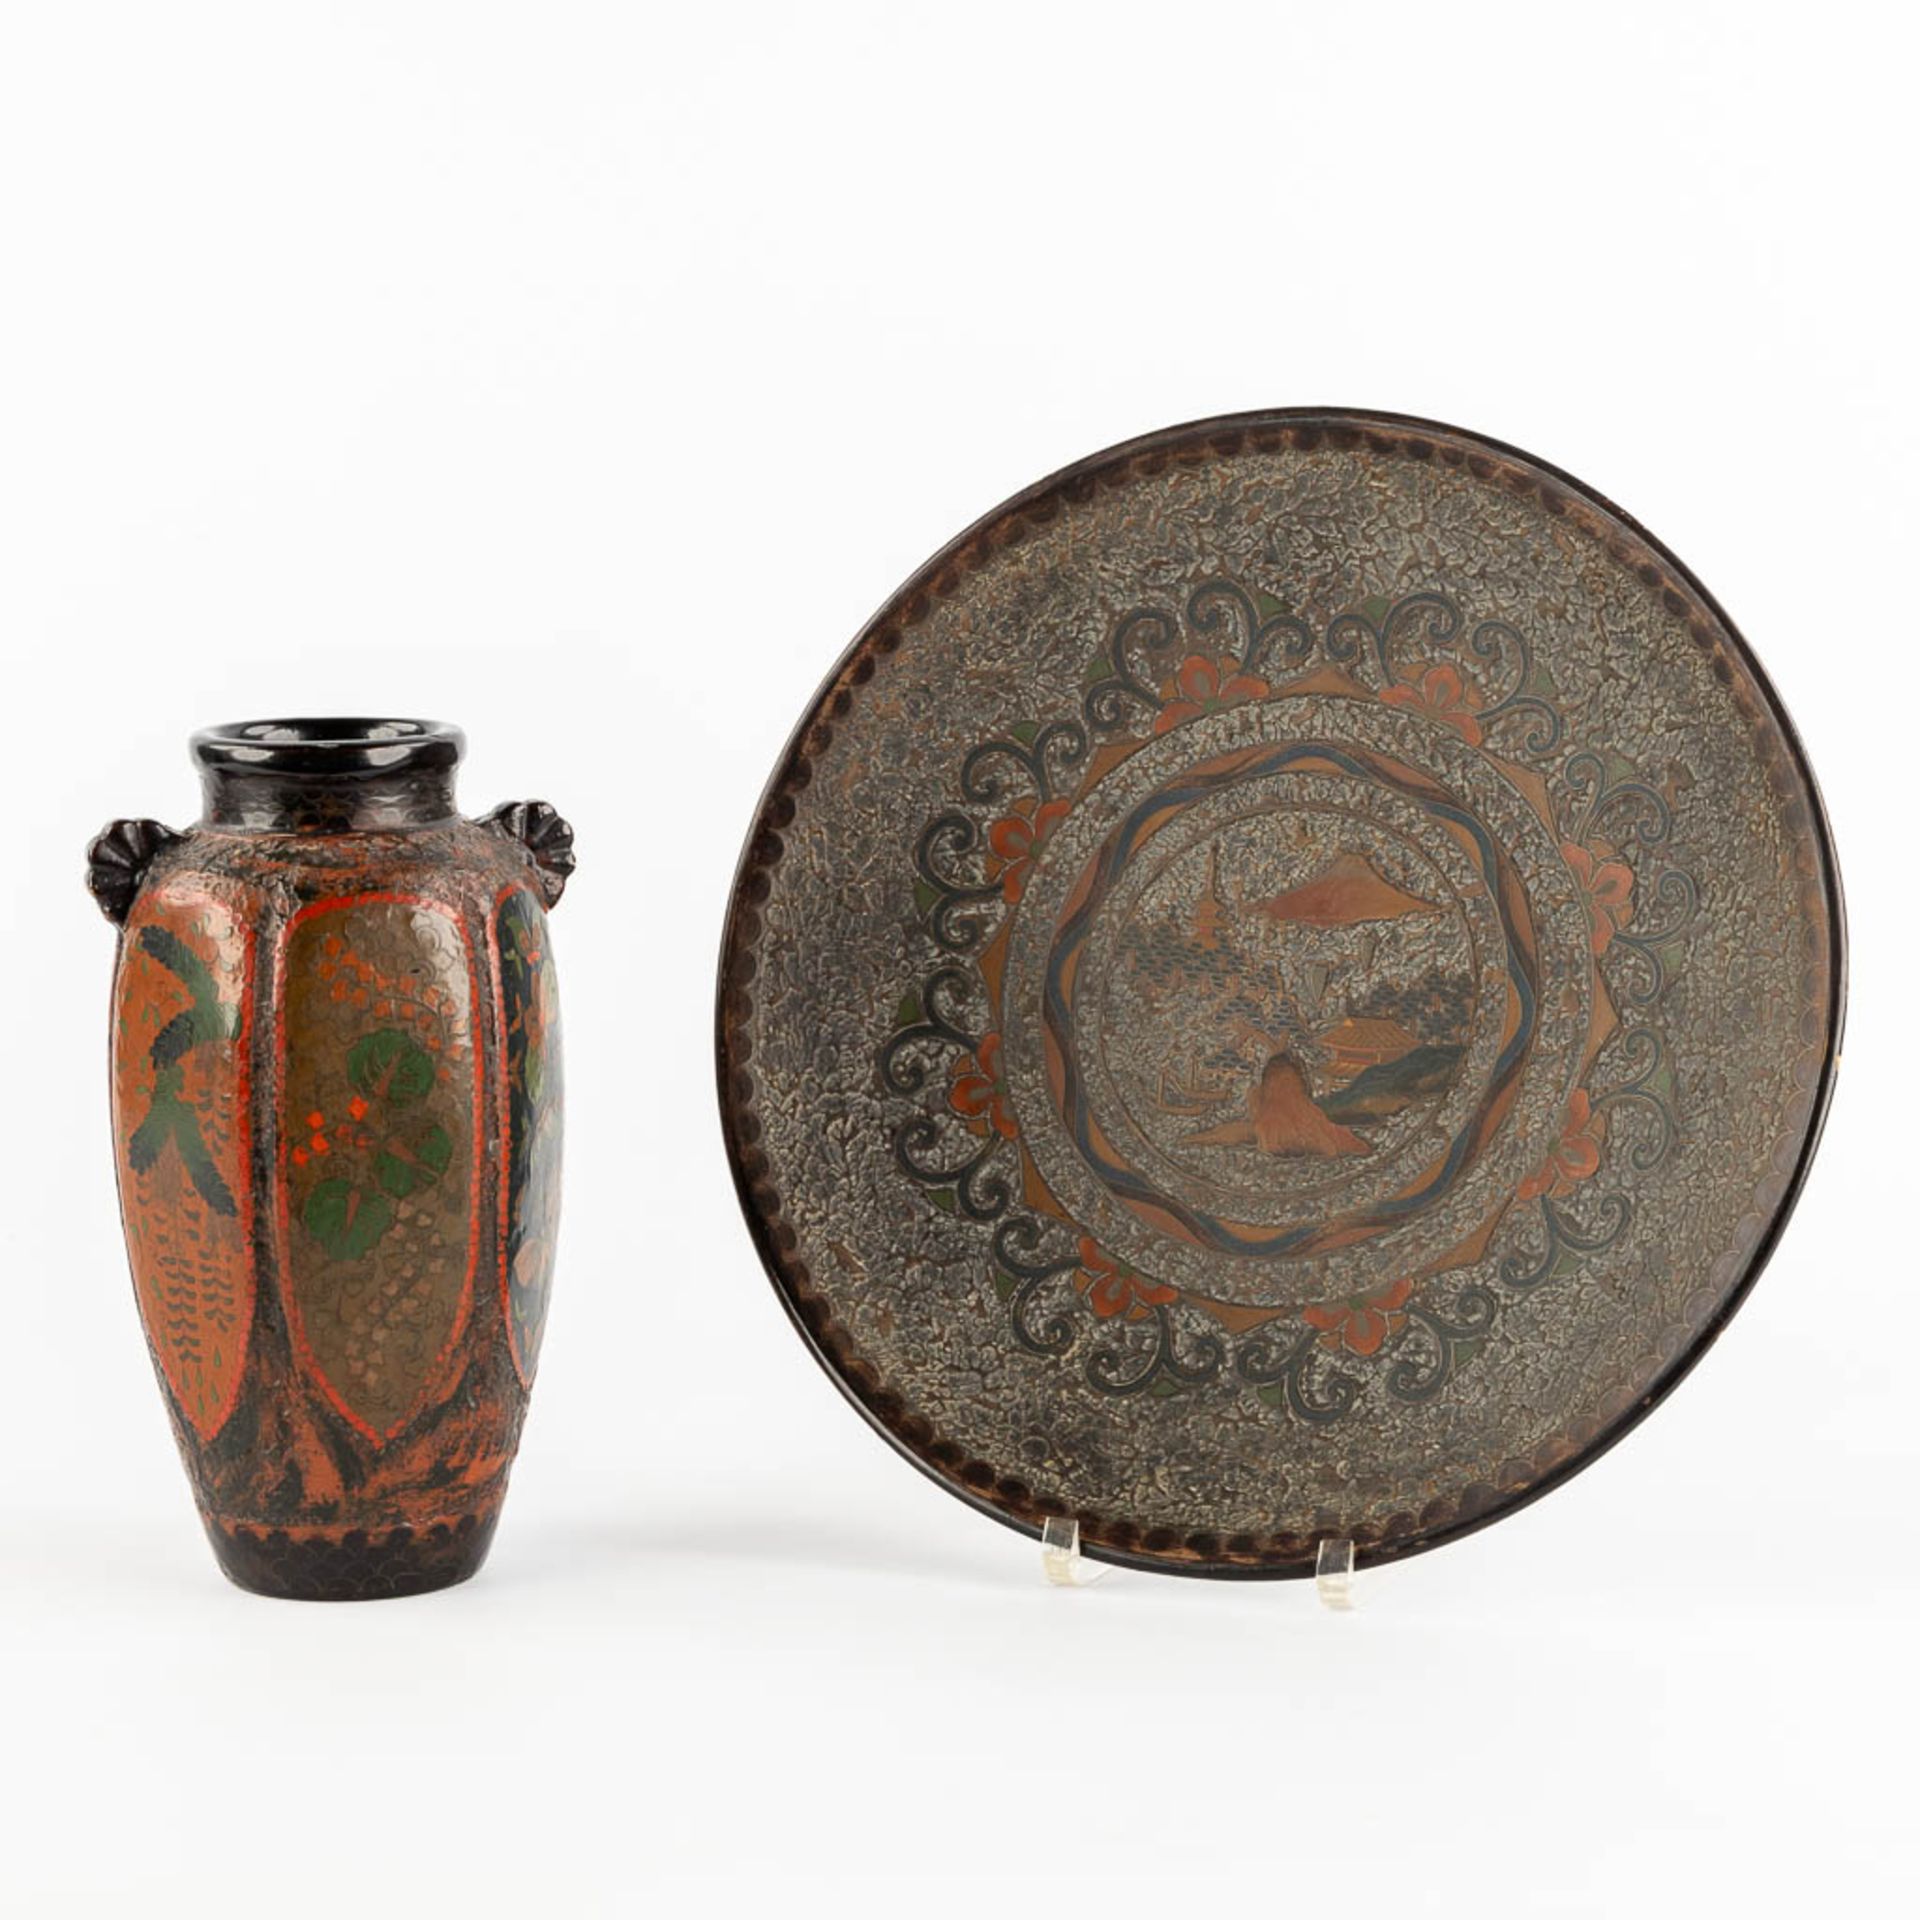 A Japanese vase and plate, stoneware inlaid with copper. Circa 1920. (H:22 x D:31 cm)